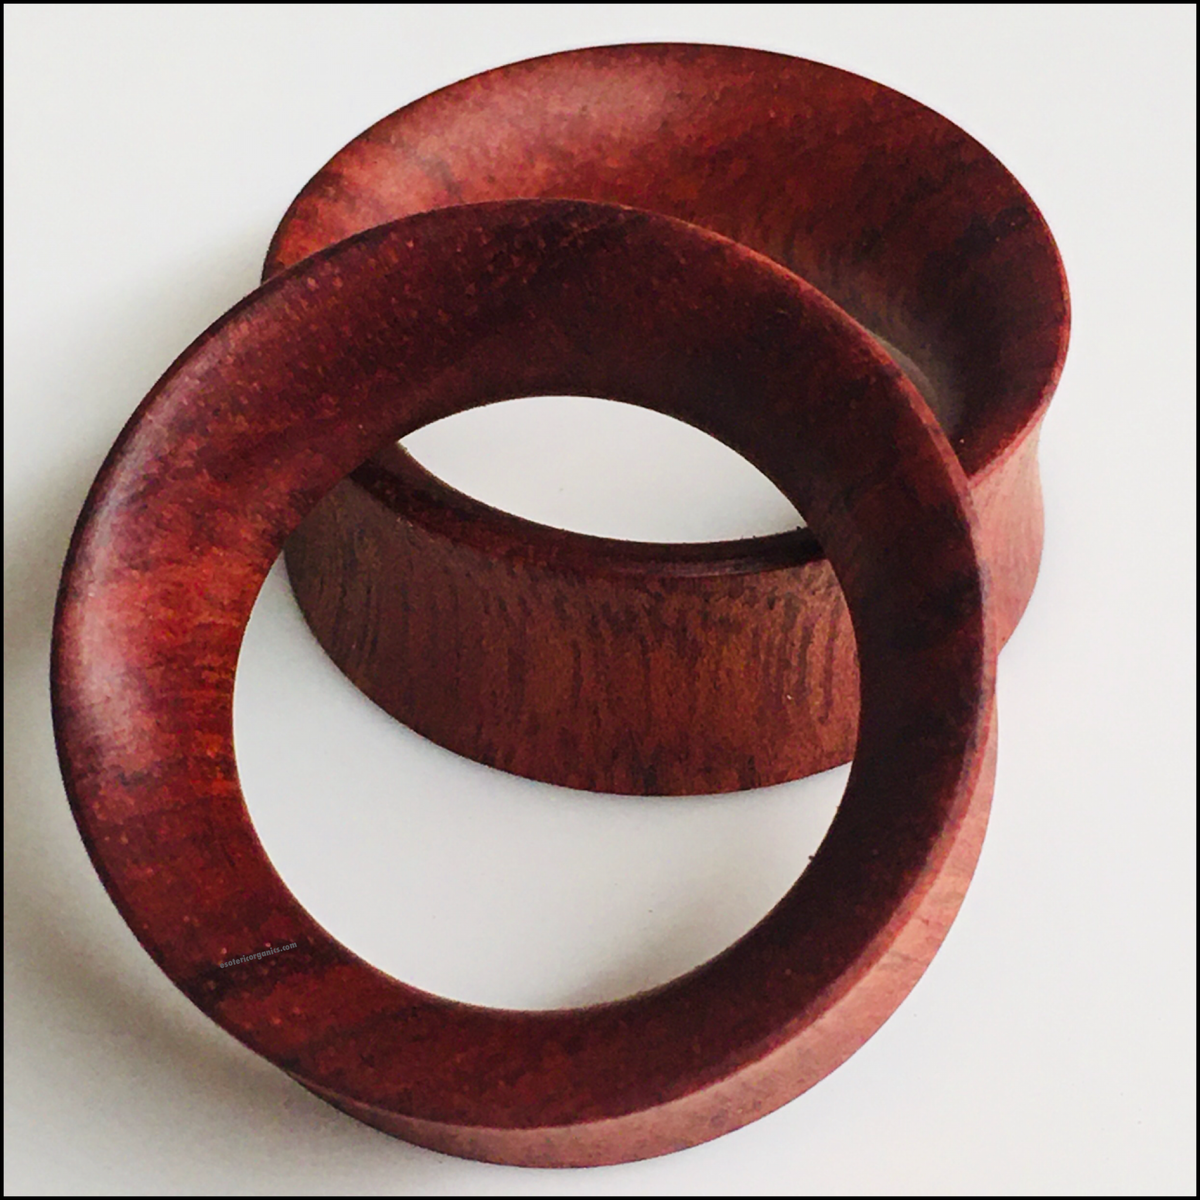 Bloodwood Thin Wall Tunnels